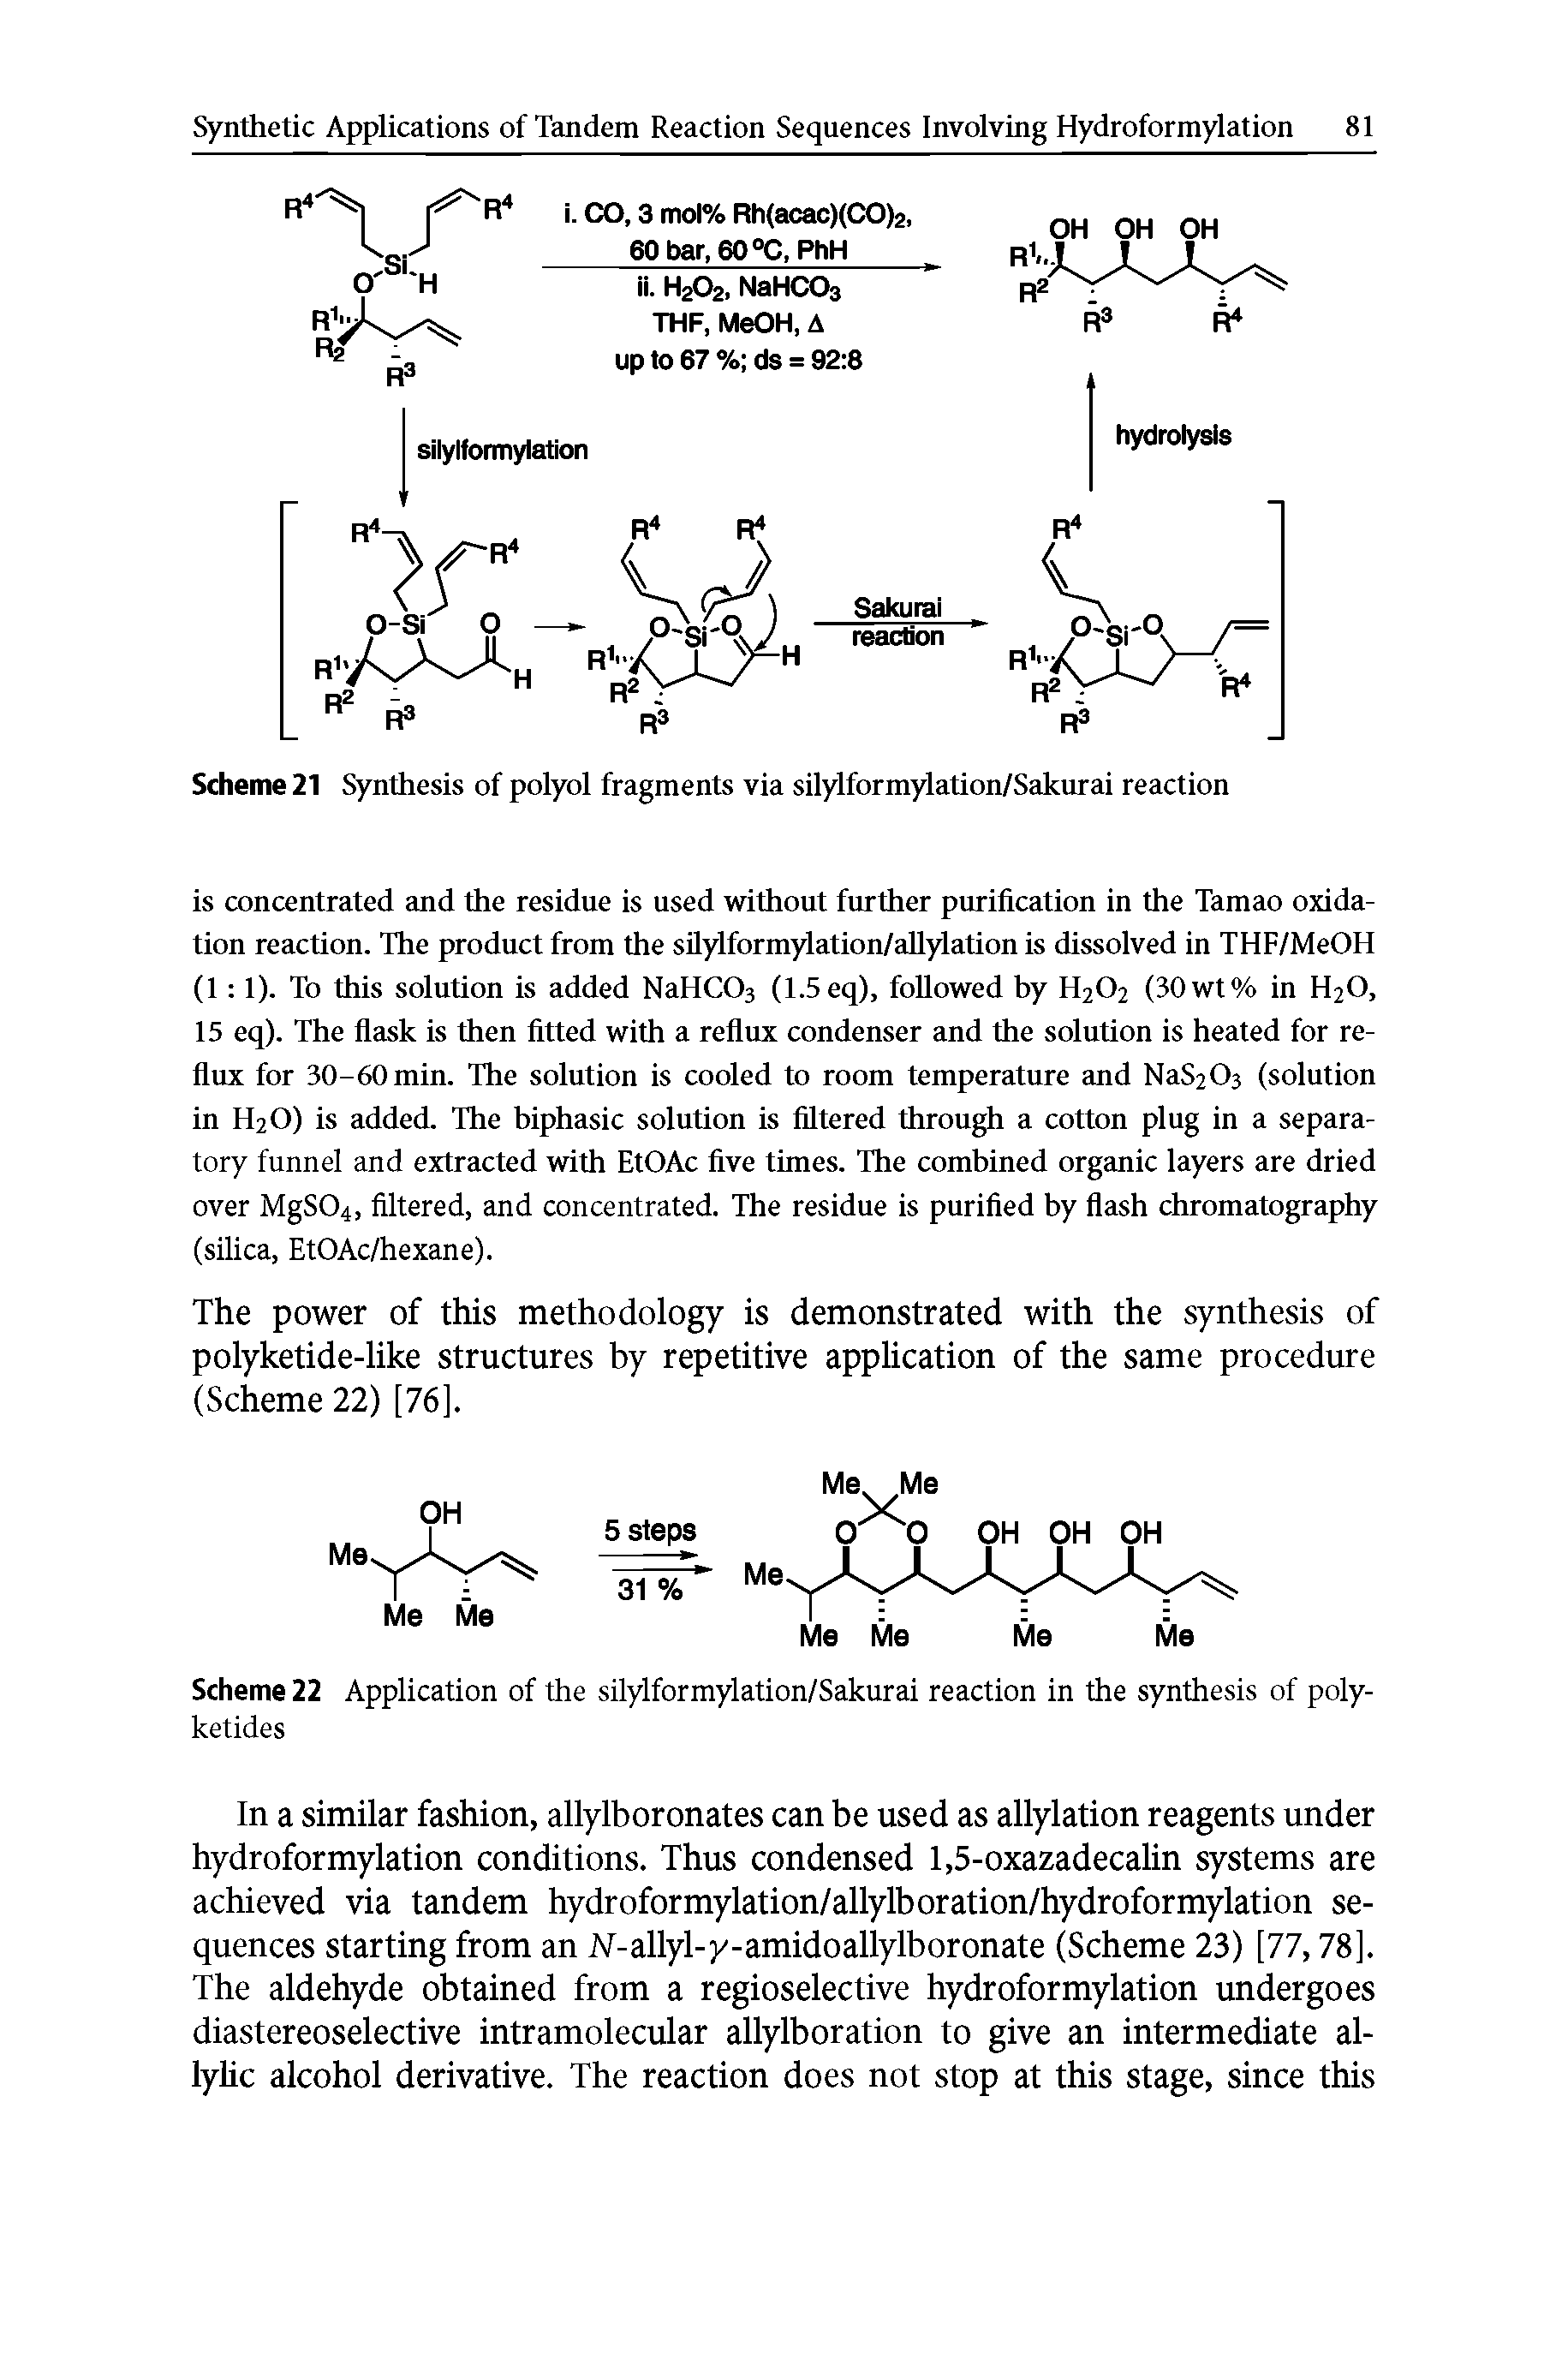 Scheme 22 Application of the silylformylation/Sakurai reaction in the synthesis of poly-ketides...